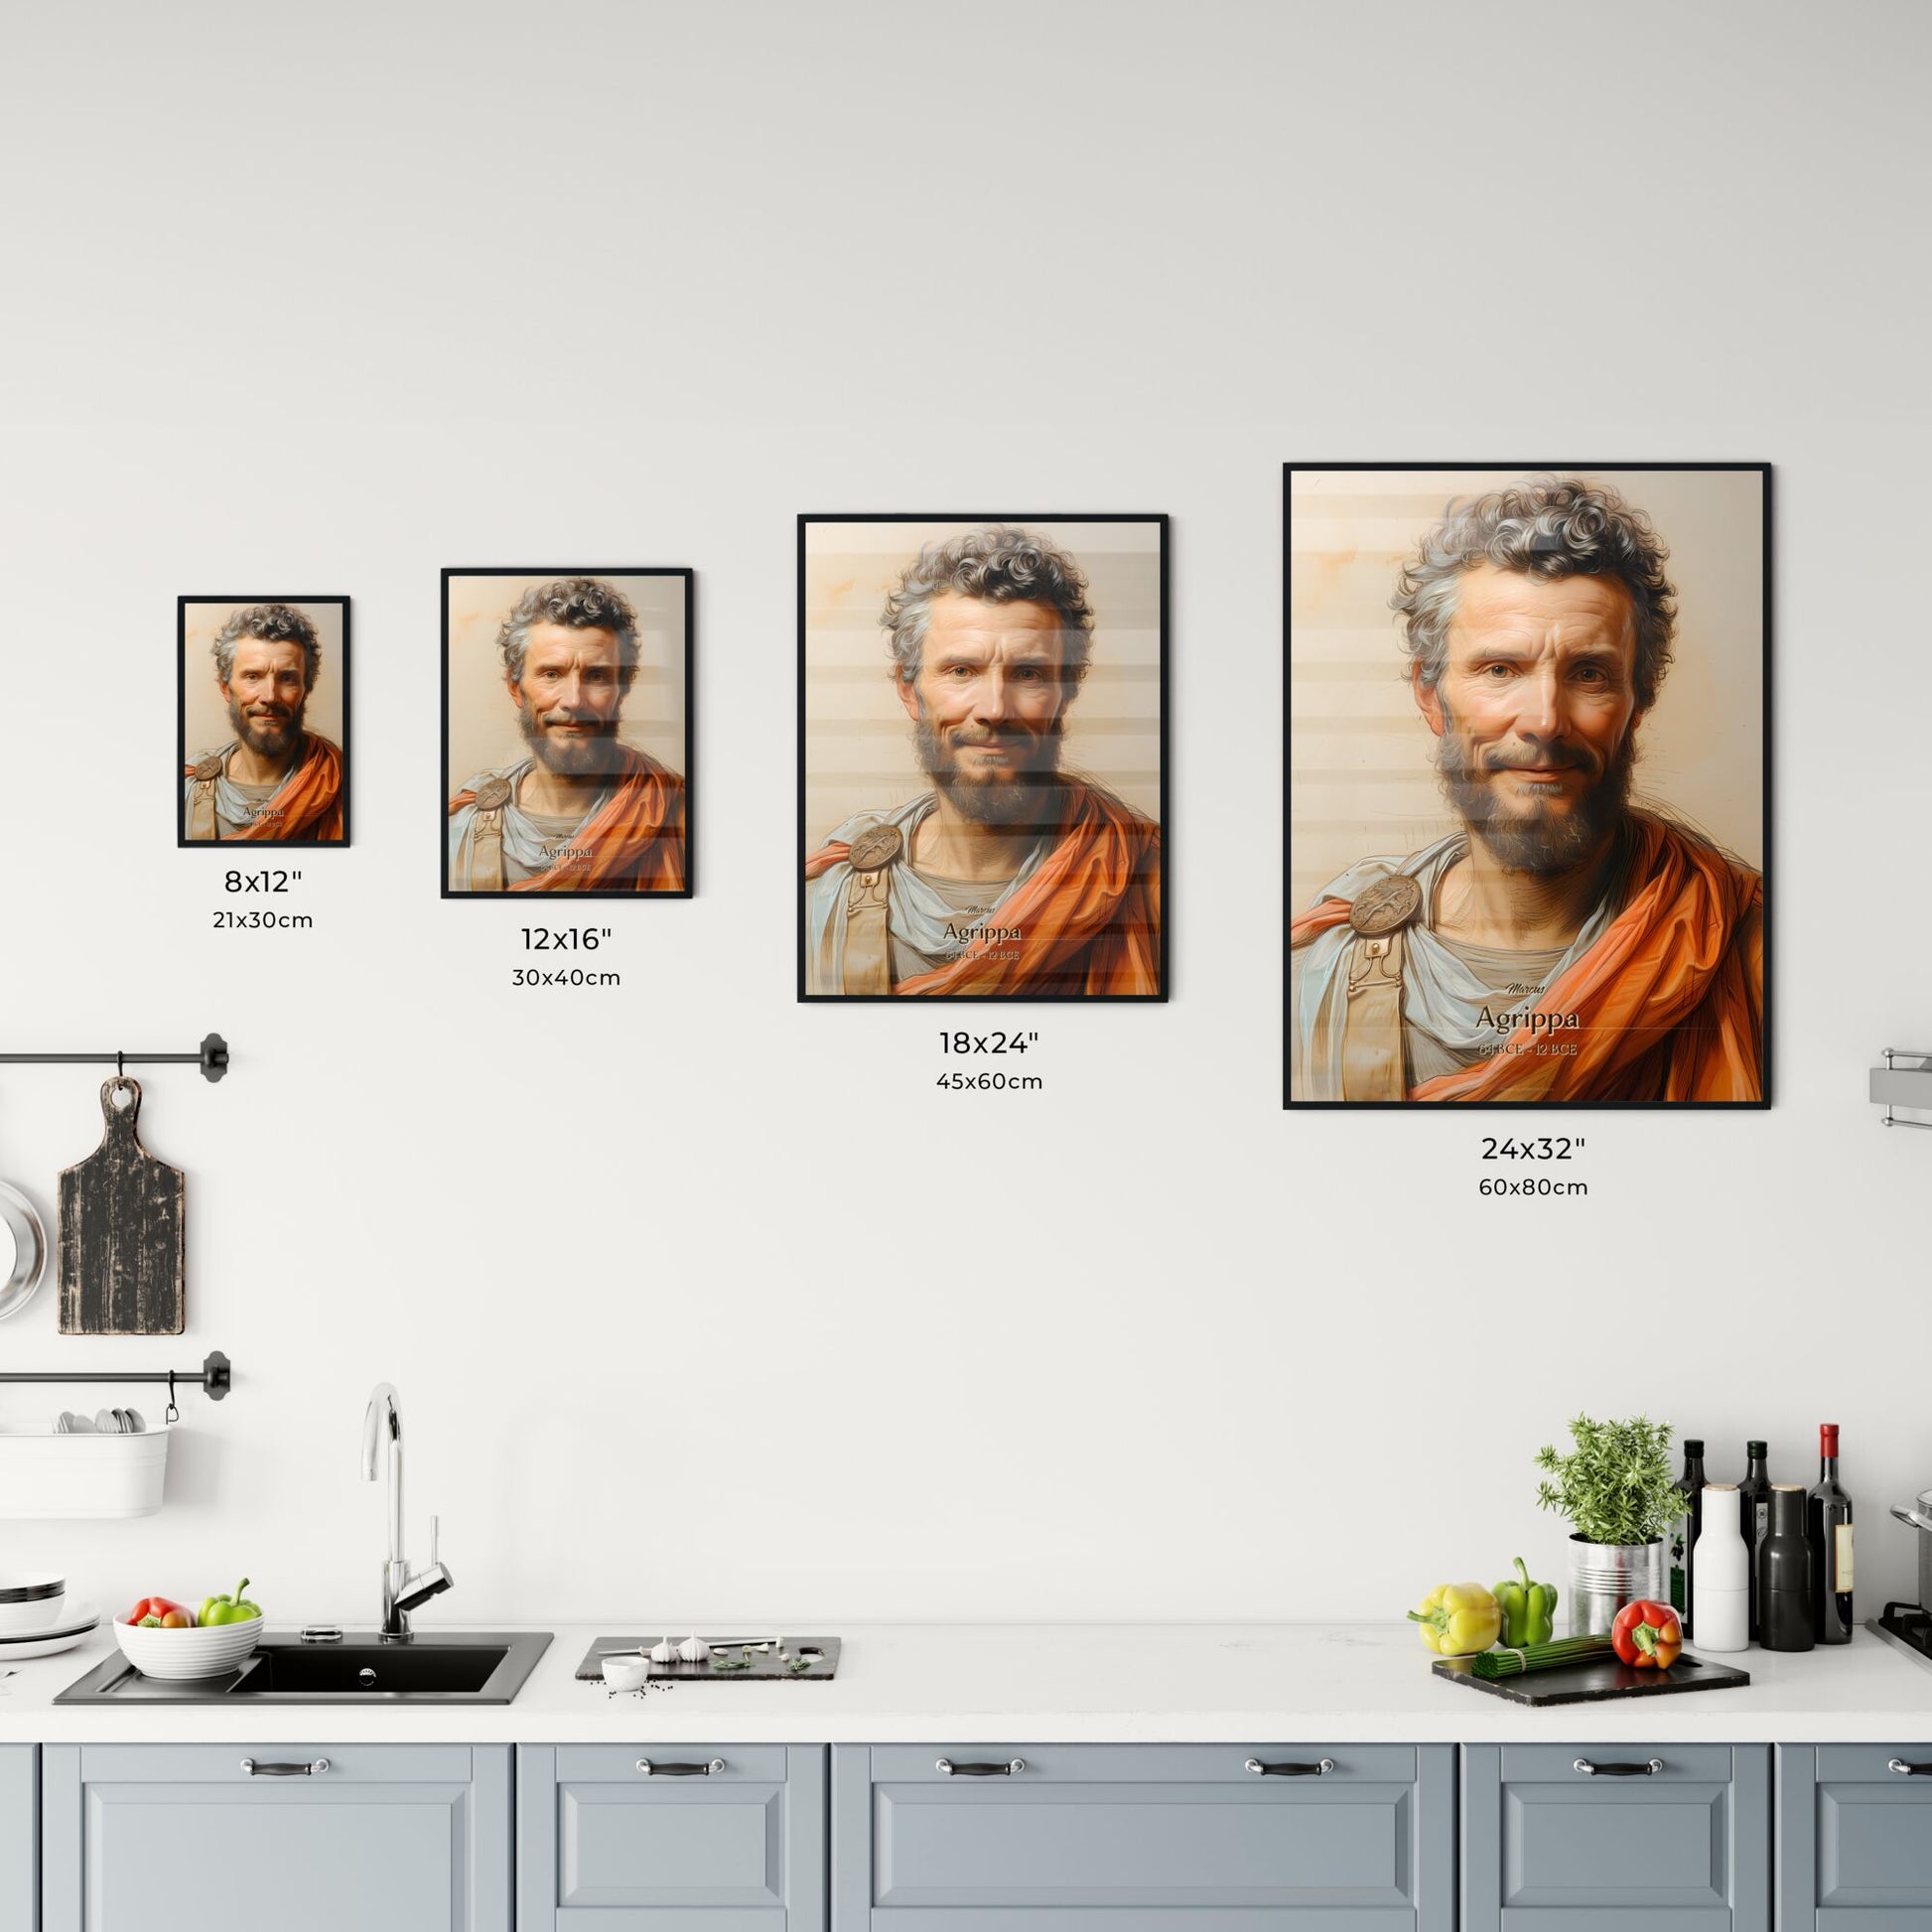 Marcus, Agrippa, 64 BCE - 12 BCE, A Poster of a man with a beard and a beard wearing an orange robe Default Title